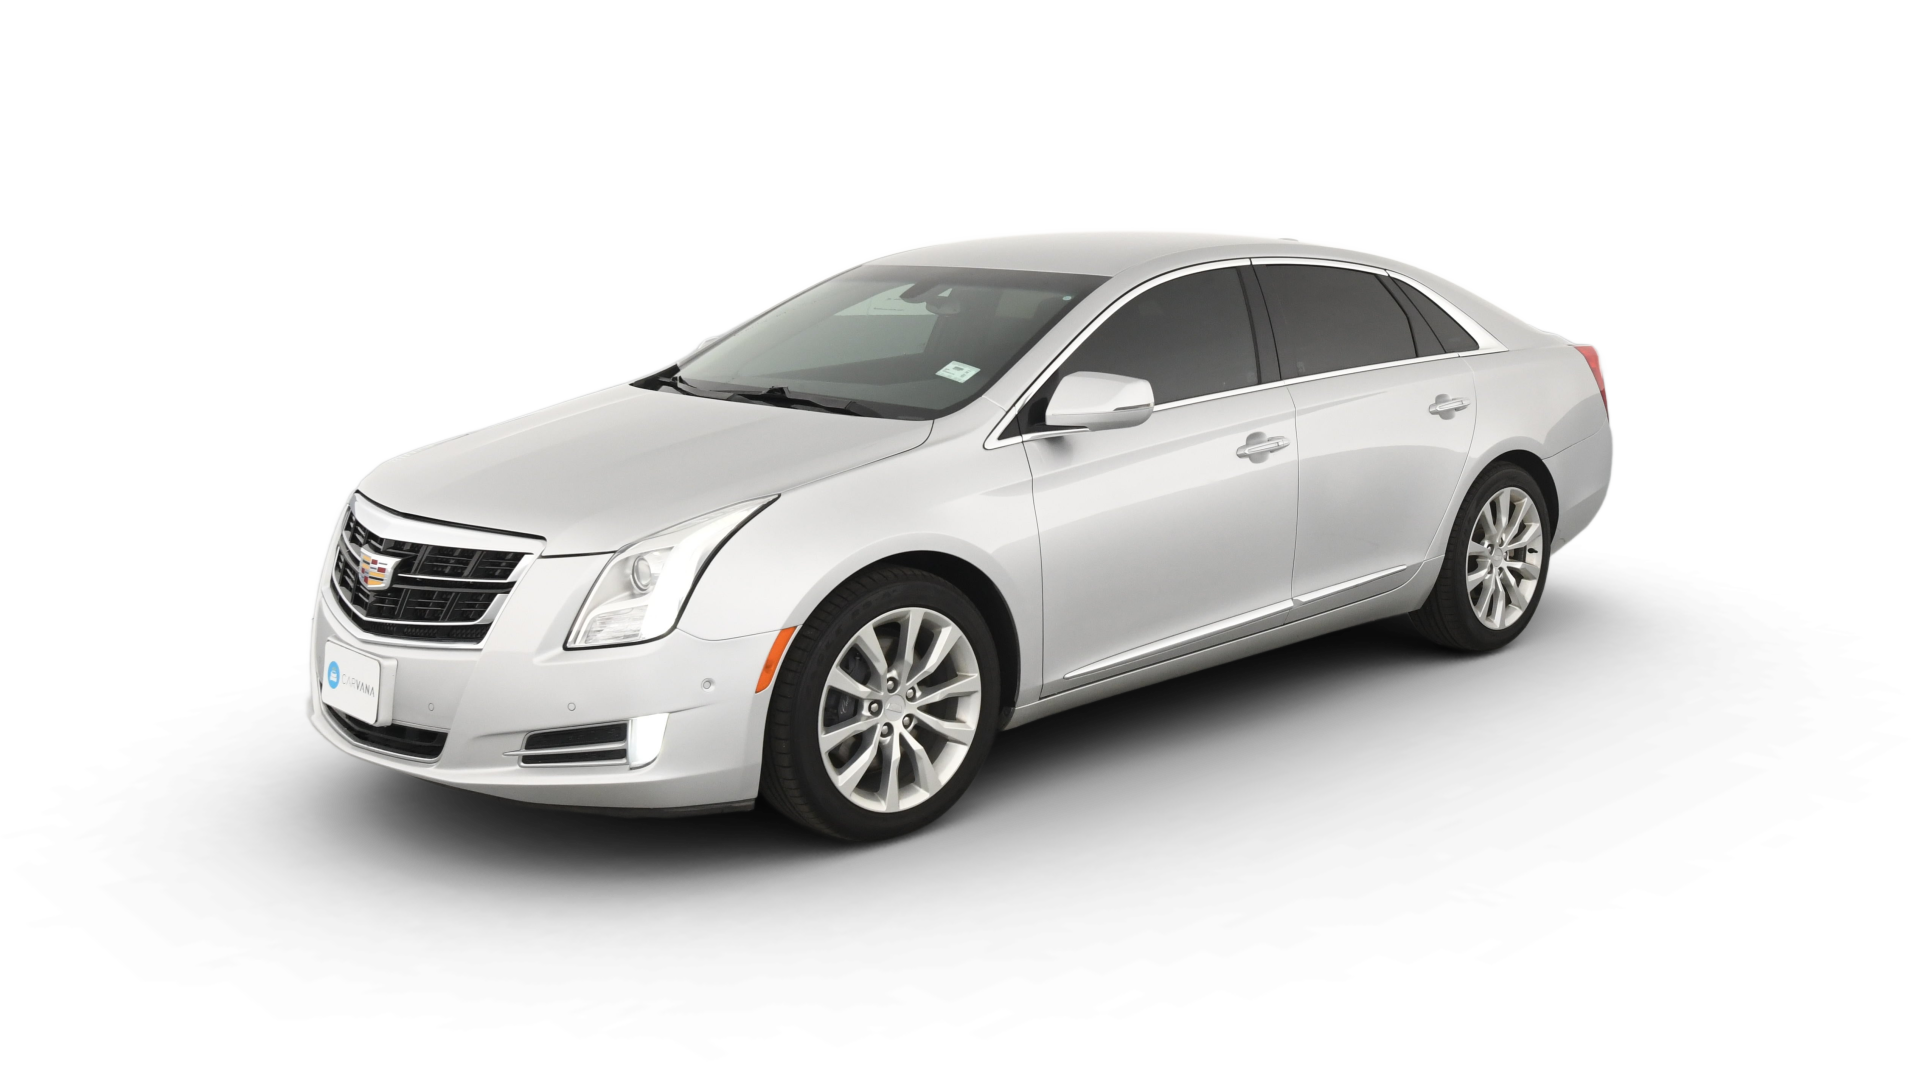 Used Cadillac XTS For Sale Online | Carvana